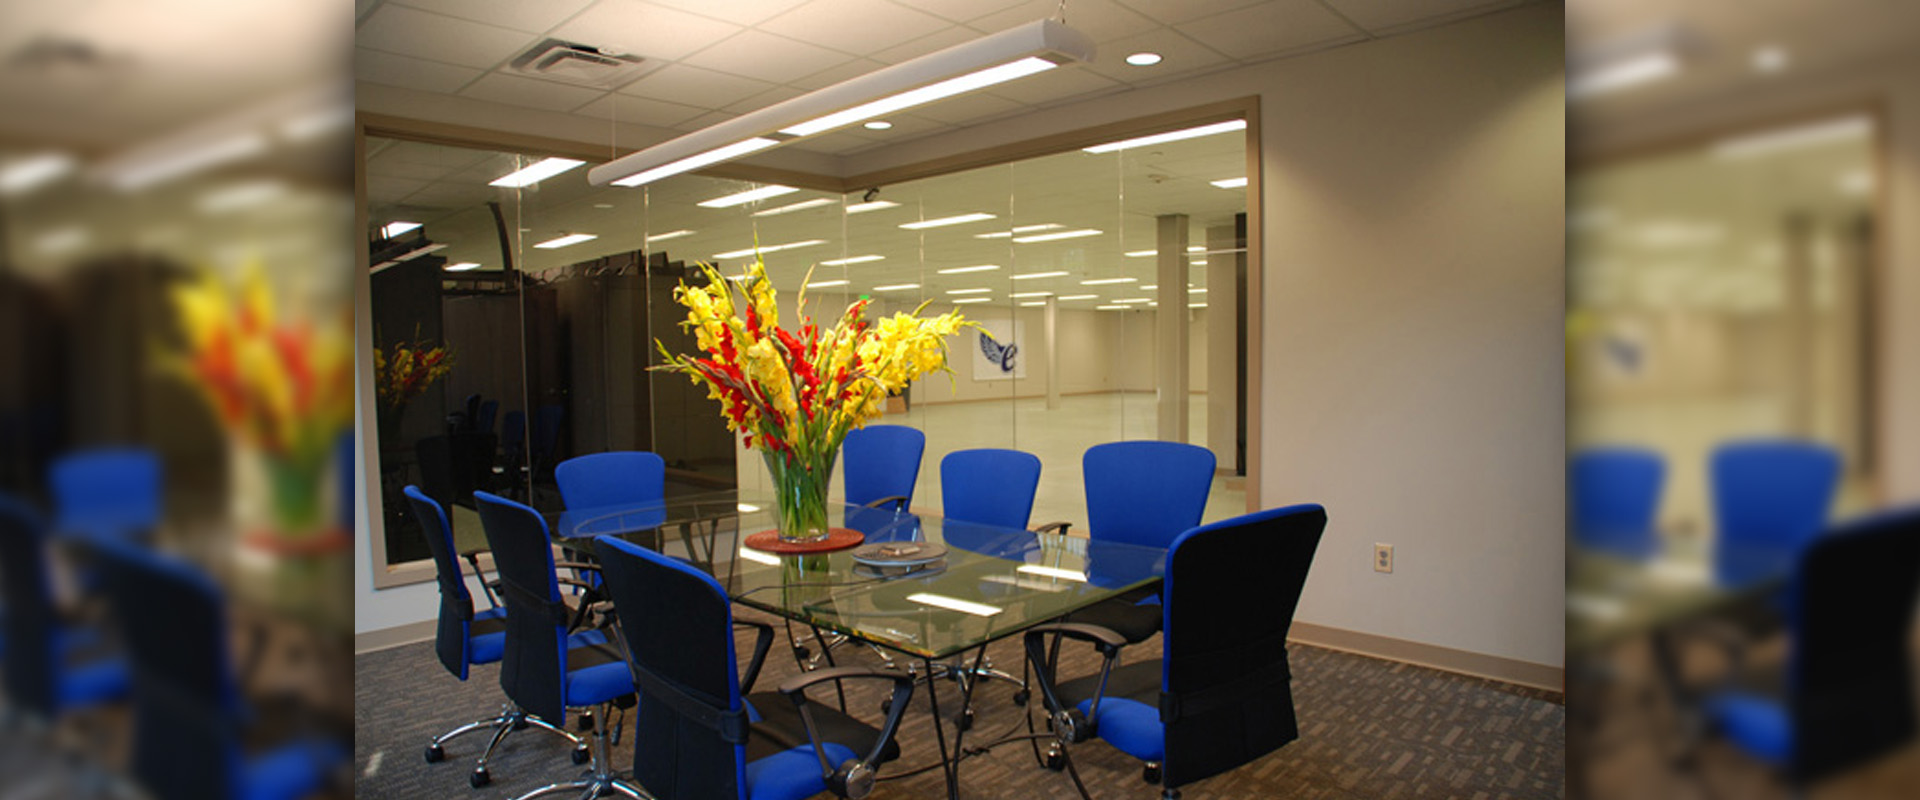 Marble Hill Medical Center - Conference Room